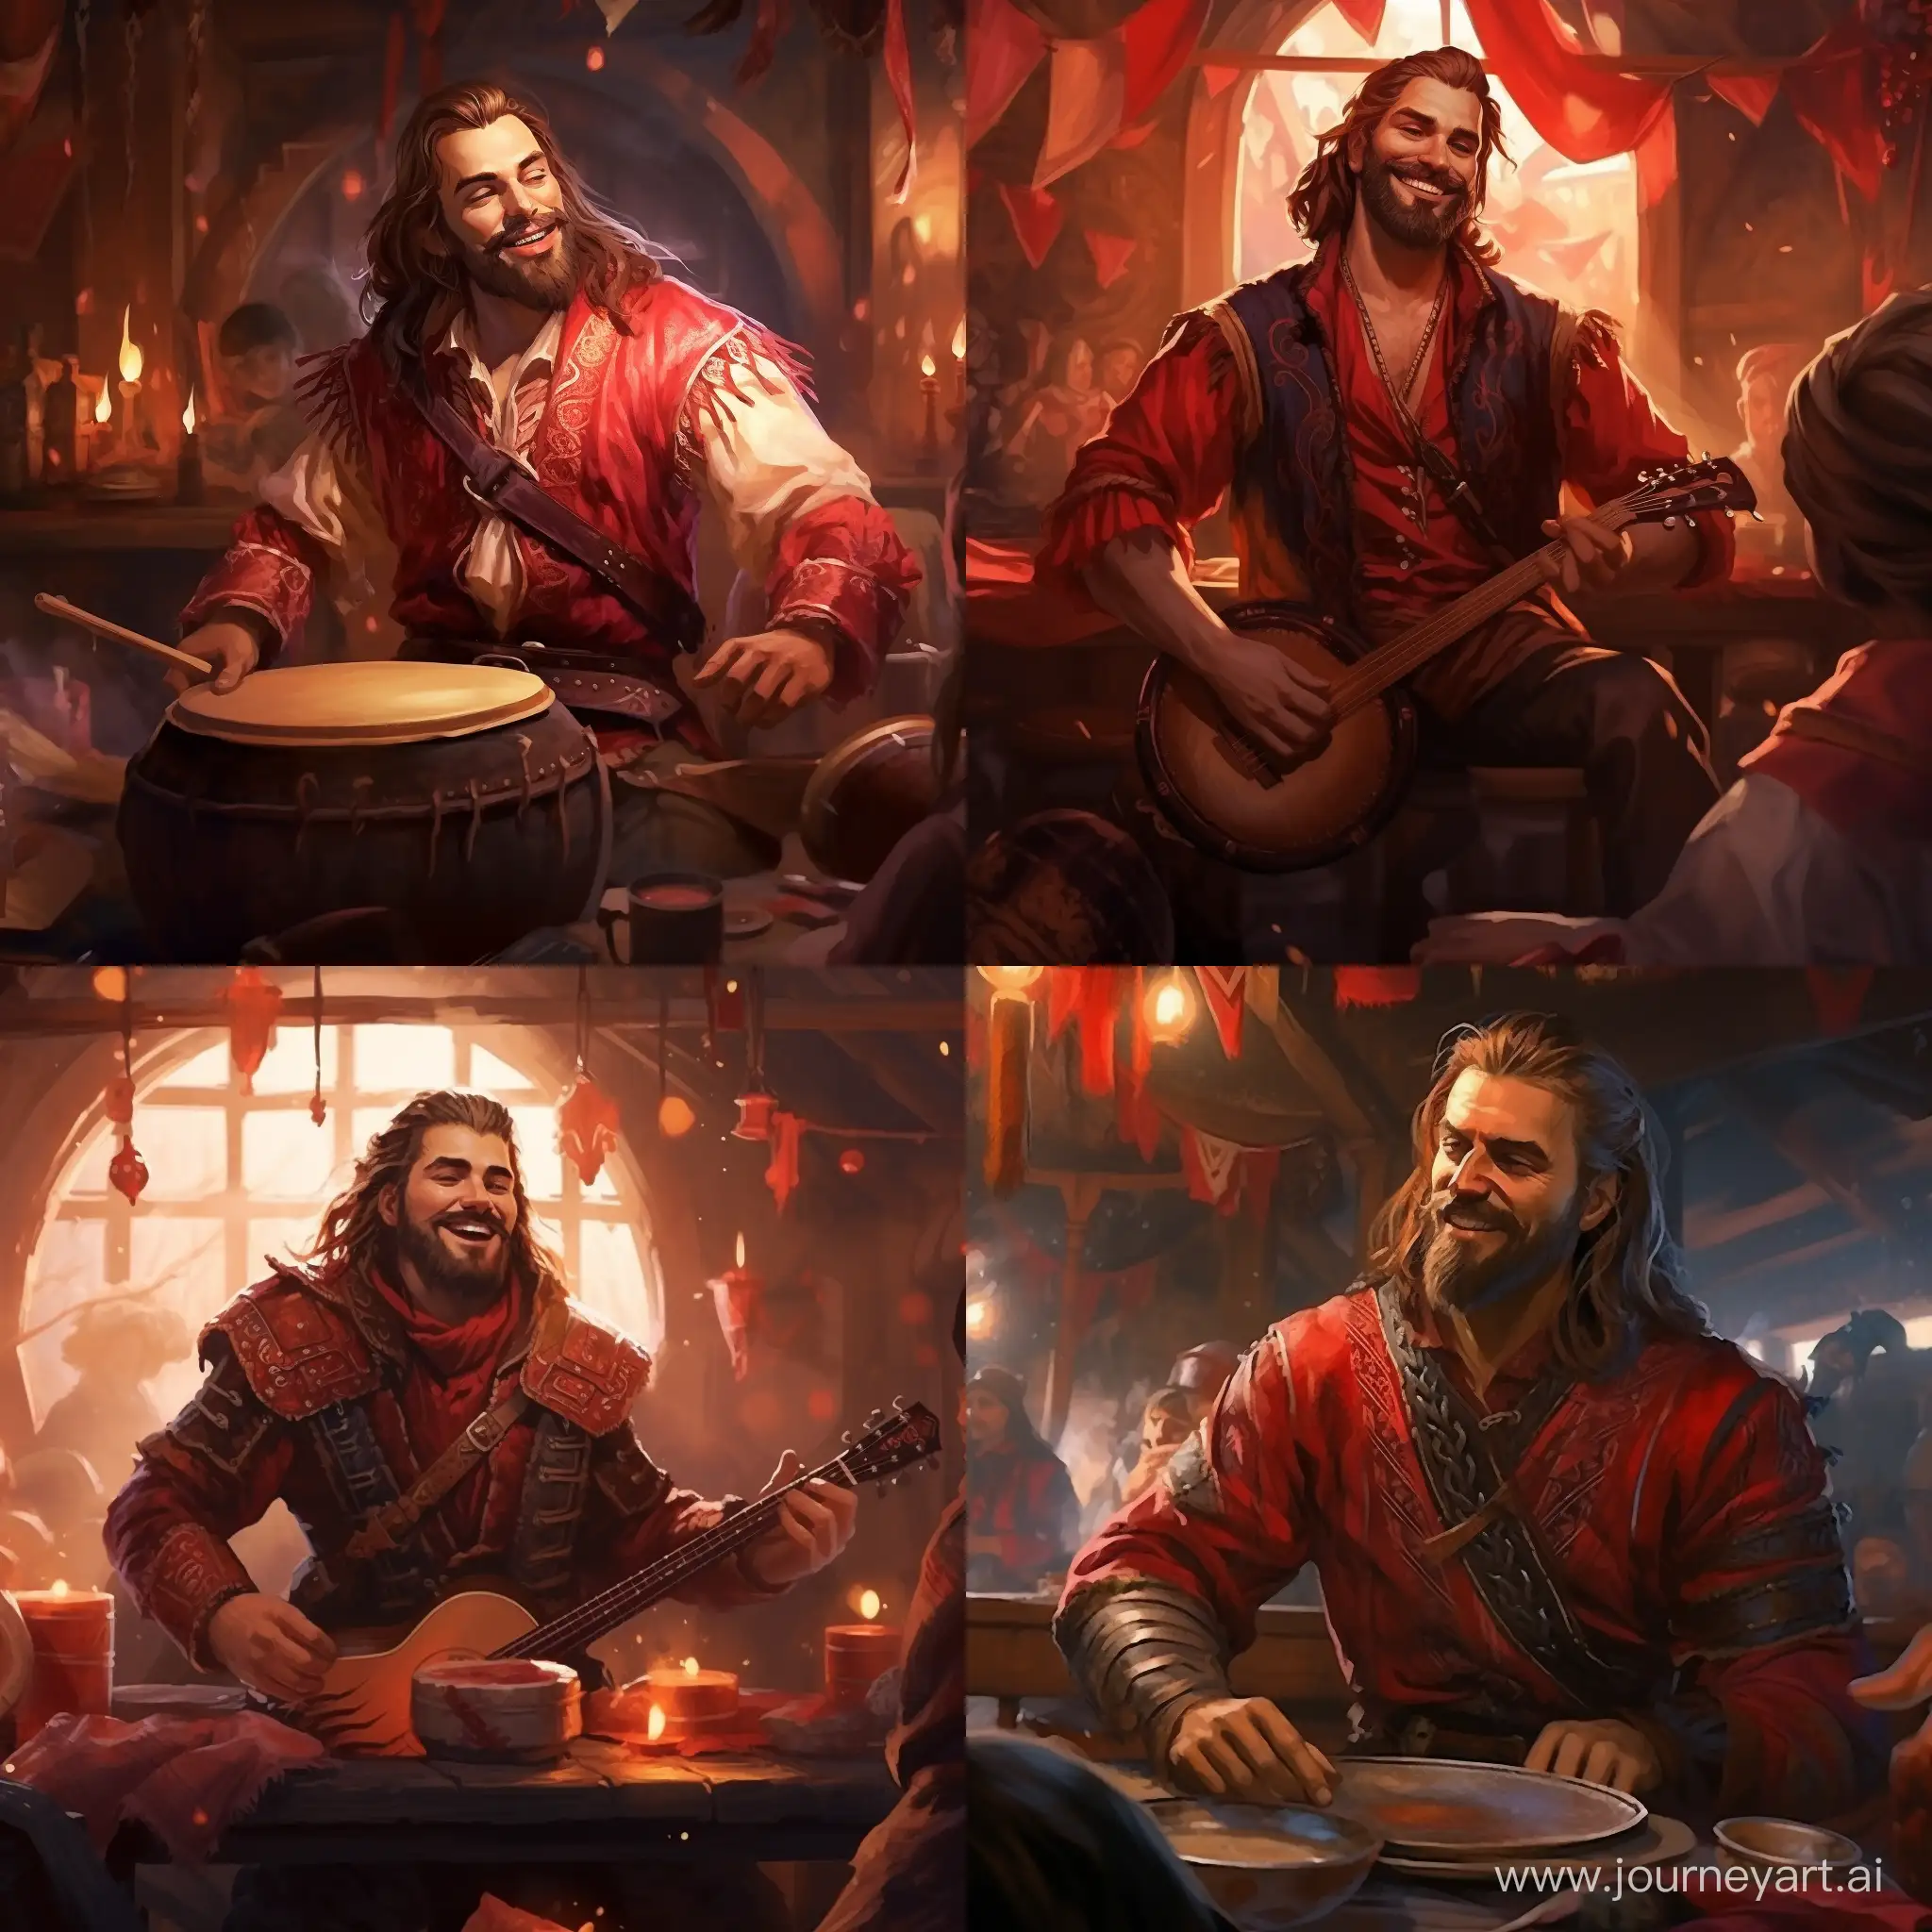 Draw me a concept art. Viking bard who stands in a tavern in the middle of a feast and he sings. He is thin and dressed in red clothes he is play on drums and singing